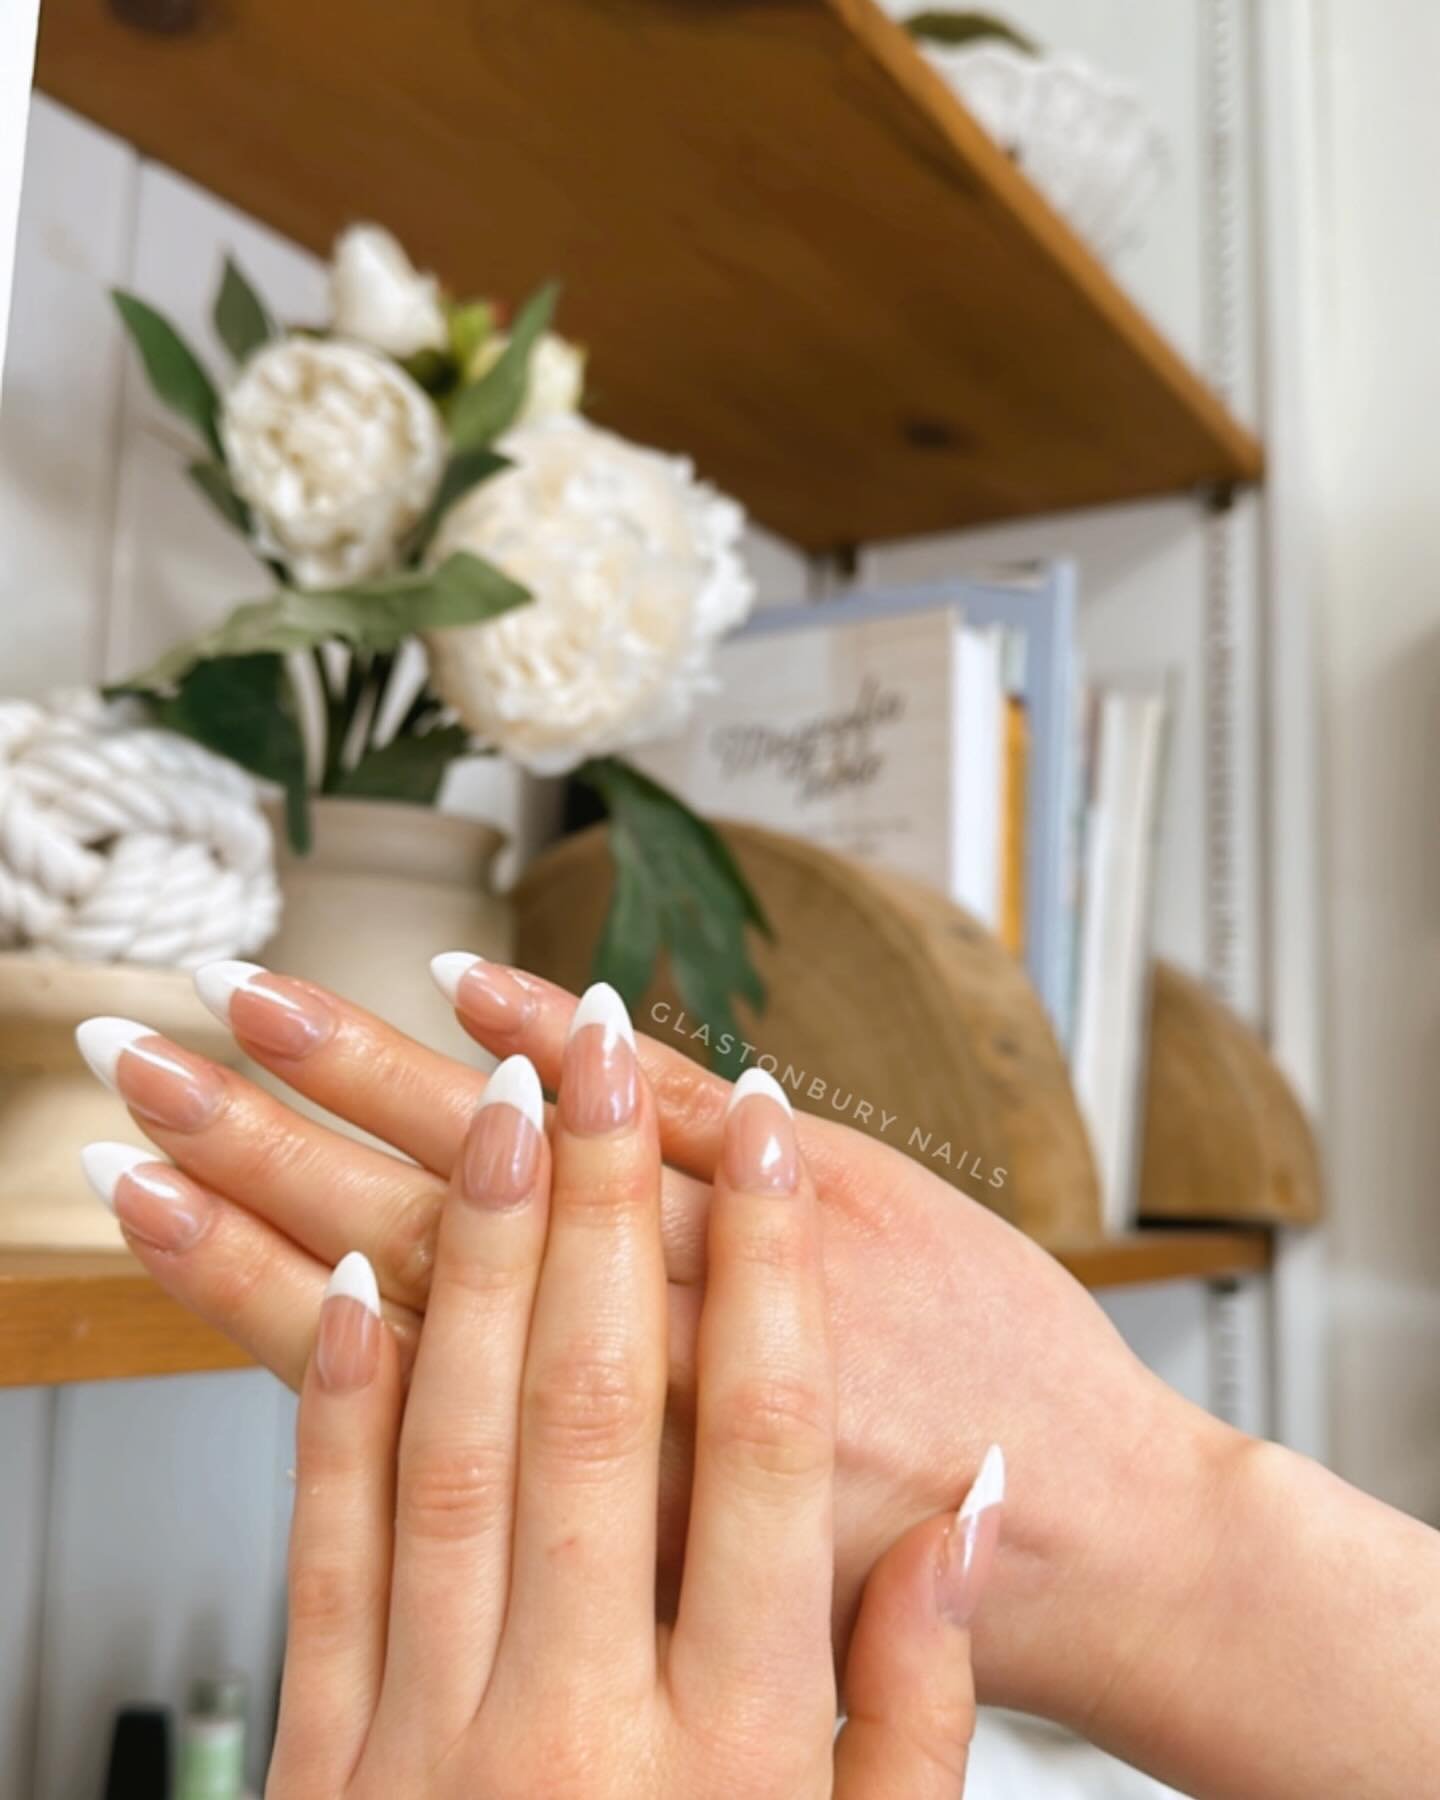 Can never go wrong with a classic French manicure with chrome powder on top. #lessismore #minimalist #glastonburyct #glastonburynails #frenchmanicure #gelmanicure